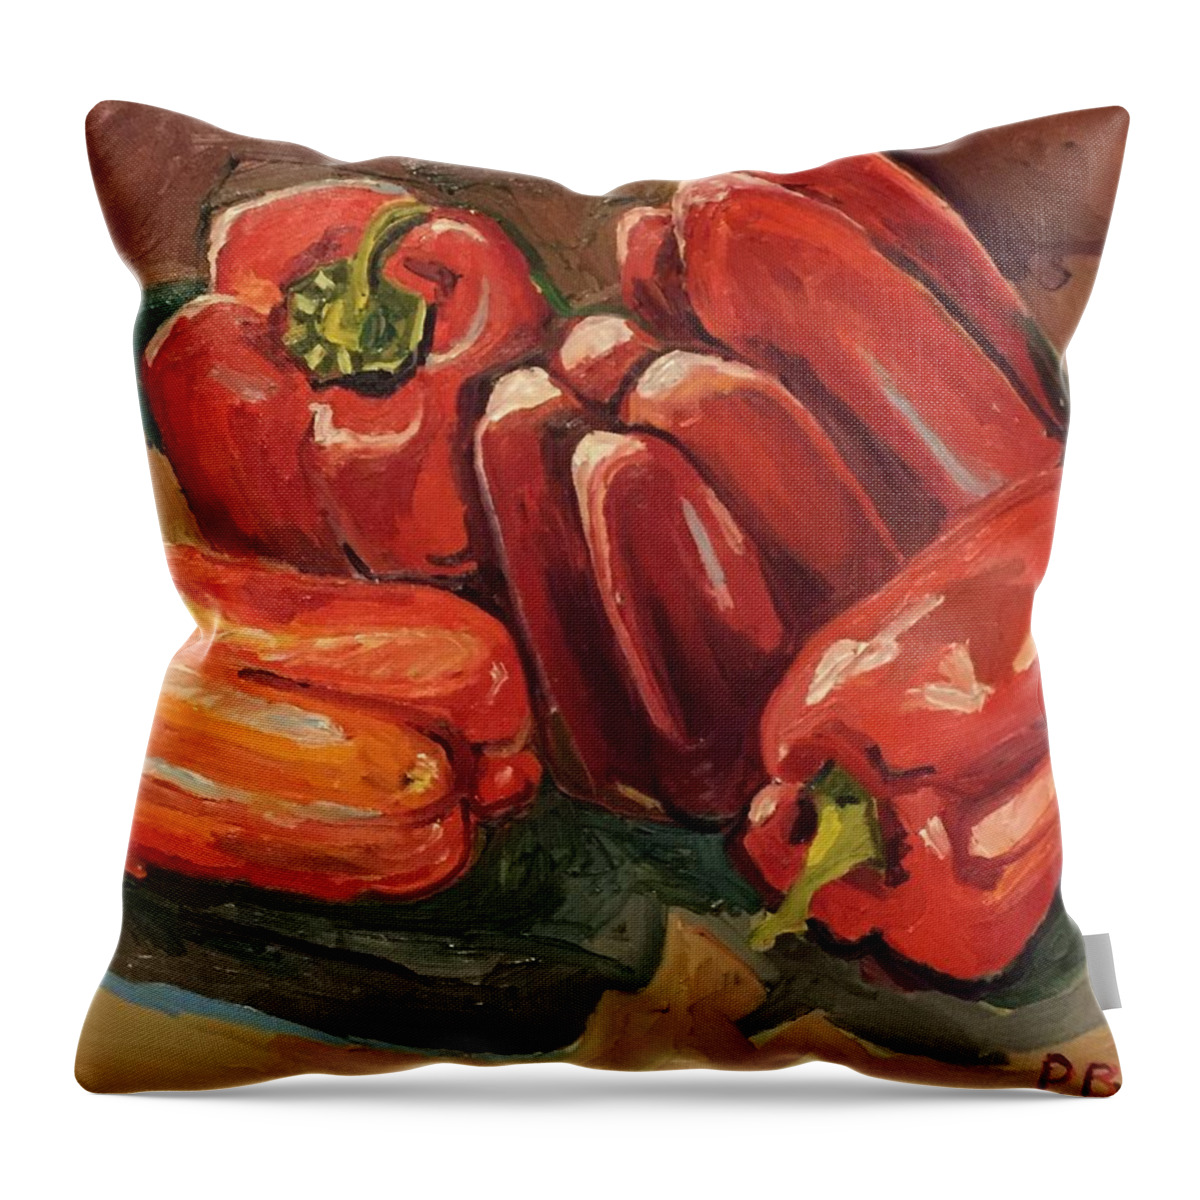 Part Of My Veggie Series. Five Red Bell Peppers.  Peppers And Shadows On A Wooden Board. Still Live Of Food Crops.  Throw Pillow featuring the painting Red Bell Peppers by Pat Gray